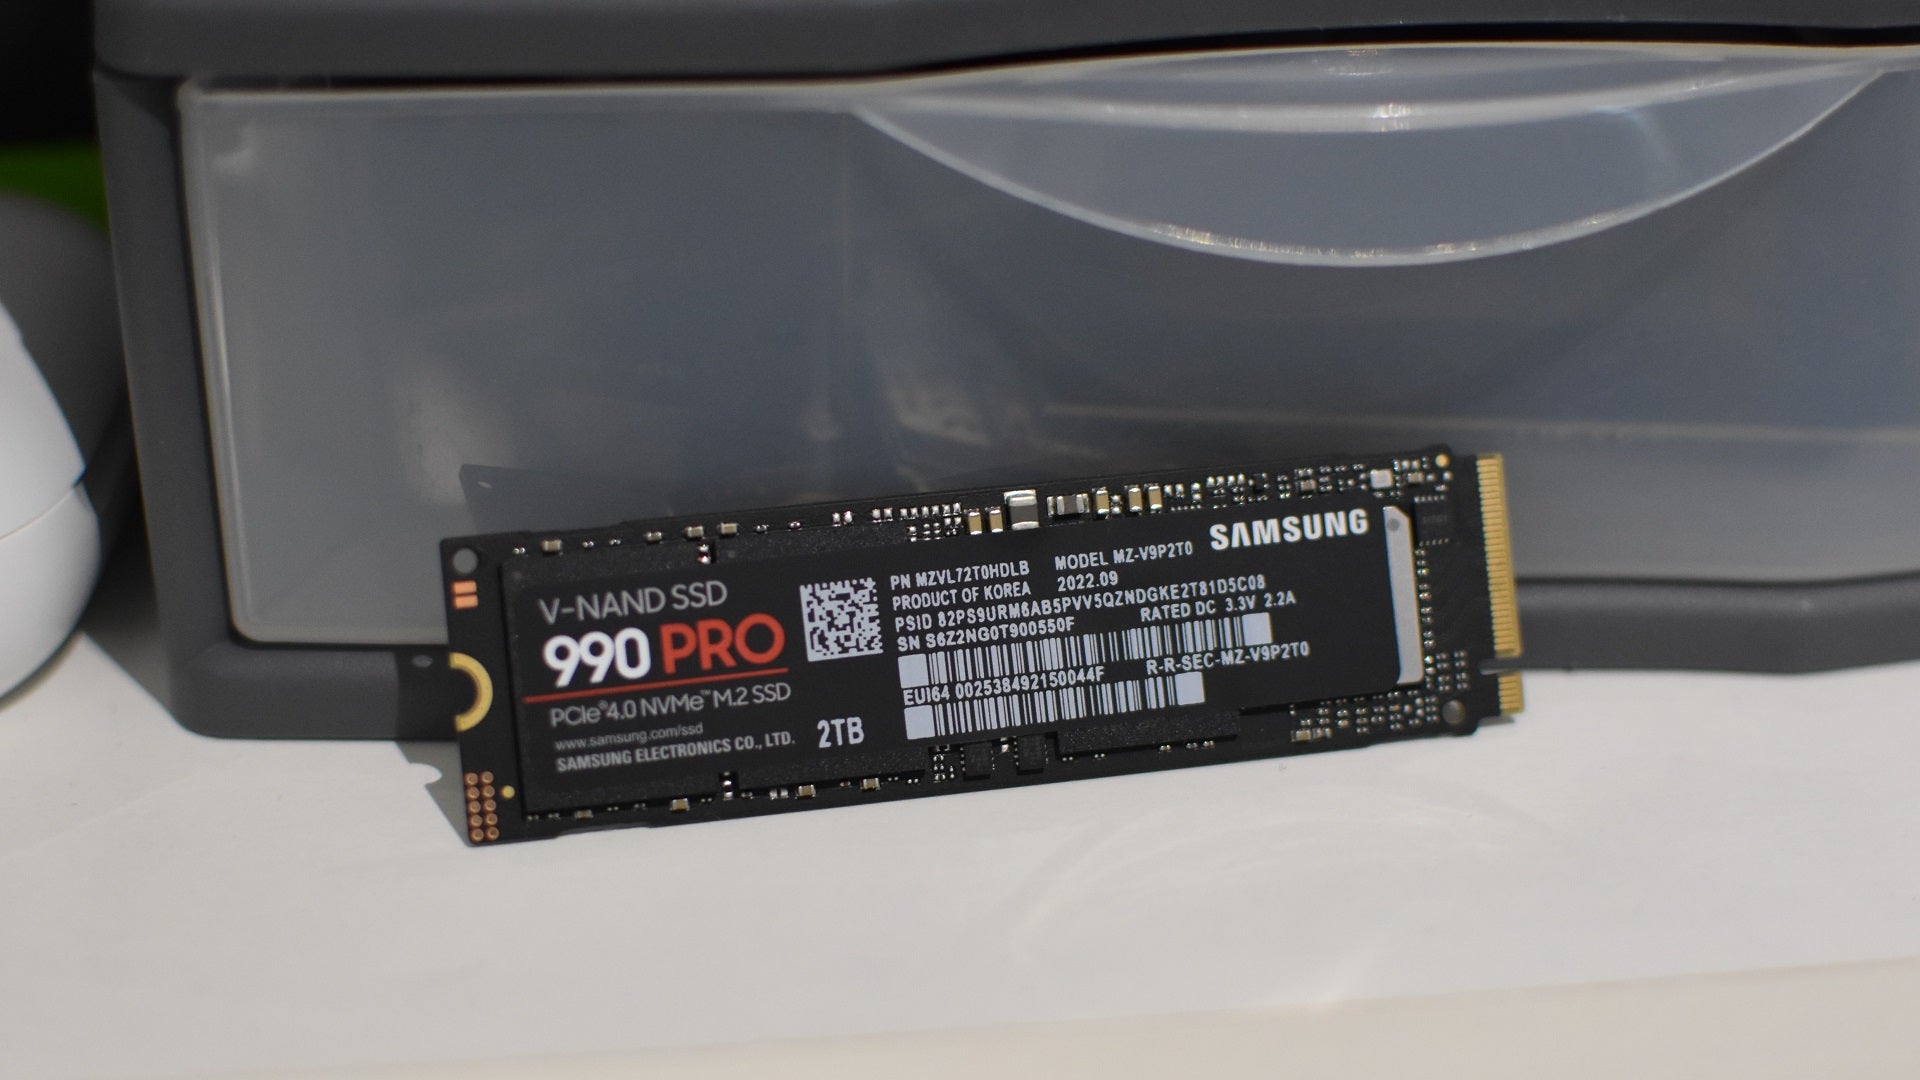 The Samsung 990 Pro SSD leaning against a plastic drawer full of other SSDs.